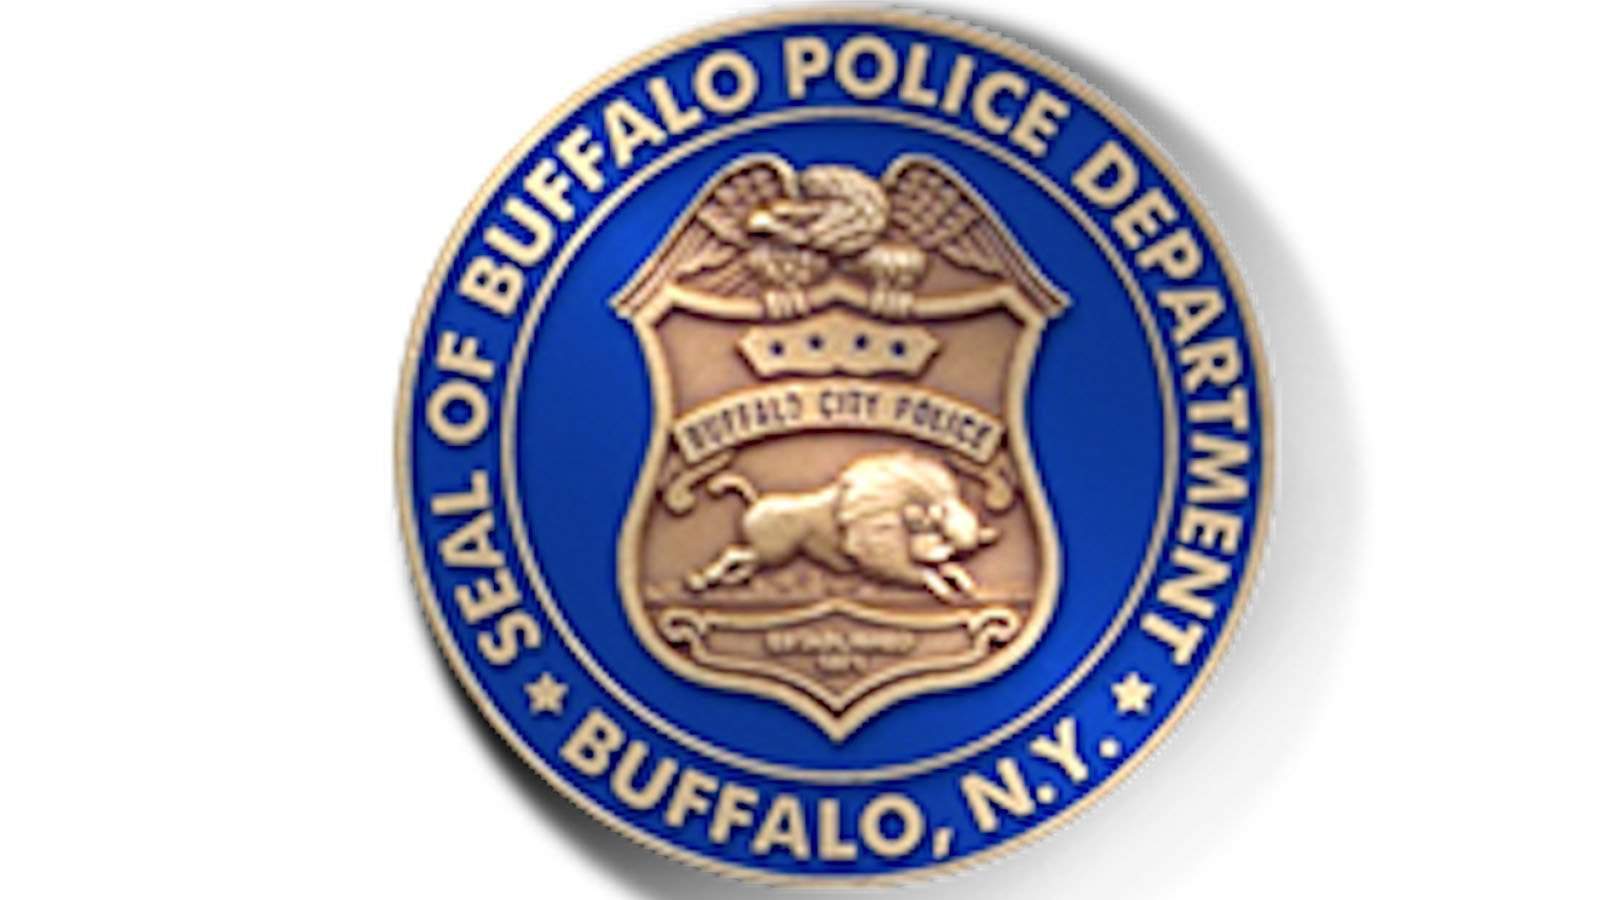 Buffalo police officers plead not guilty to assaulting 75-year-old man at demonstration